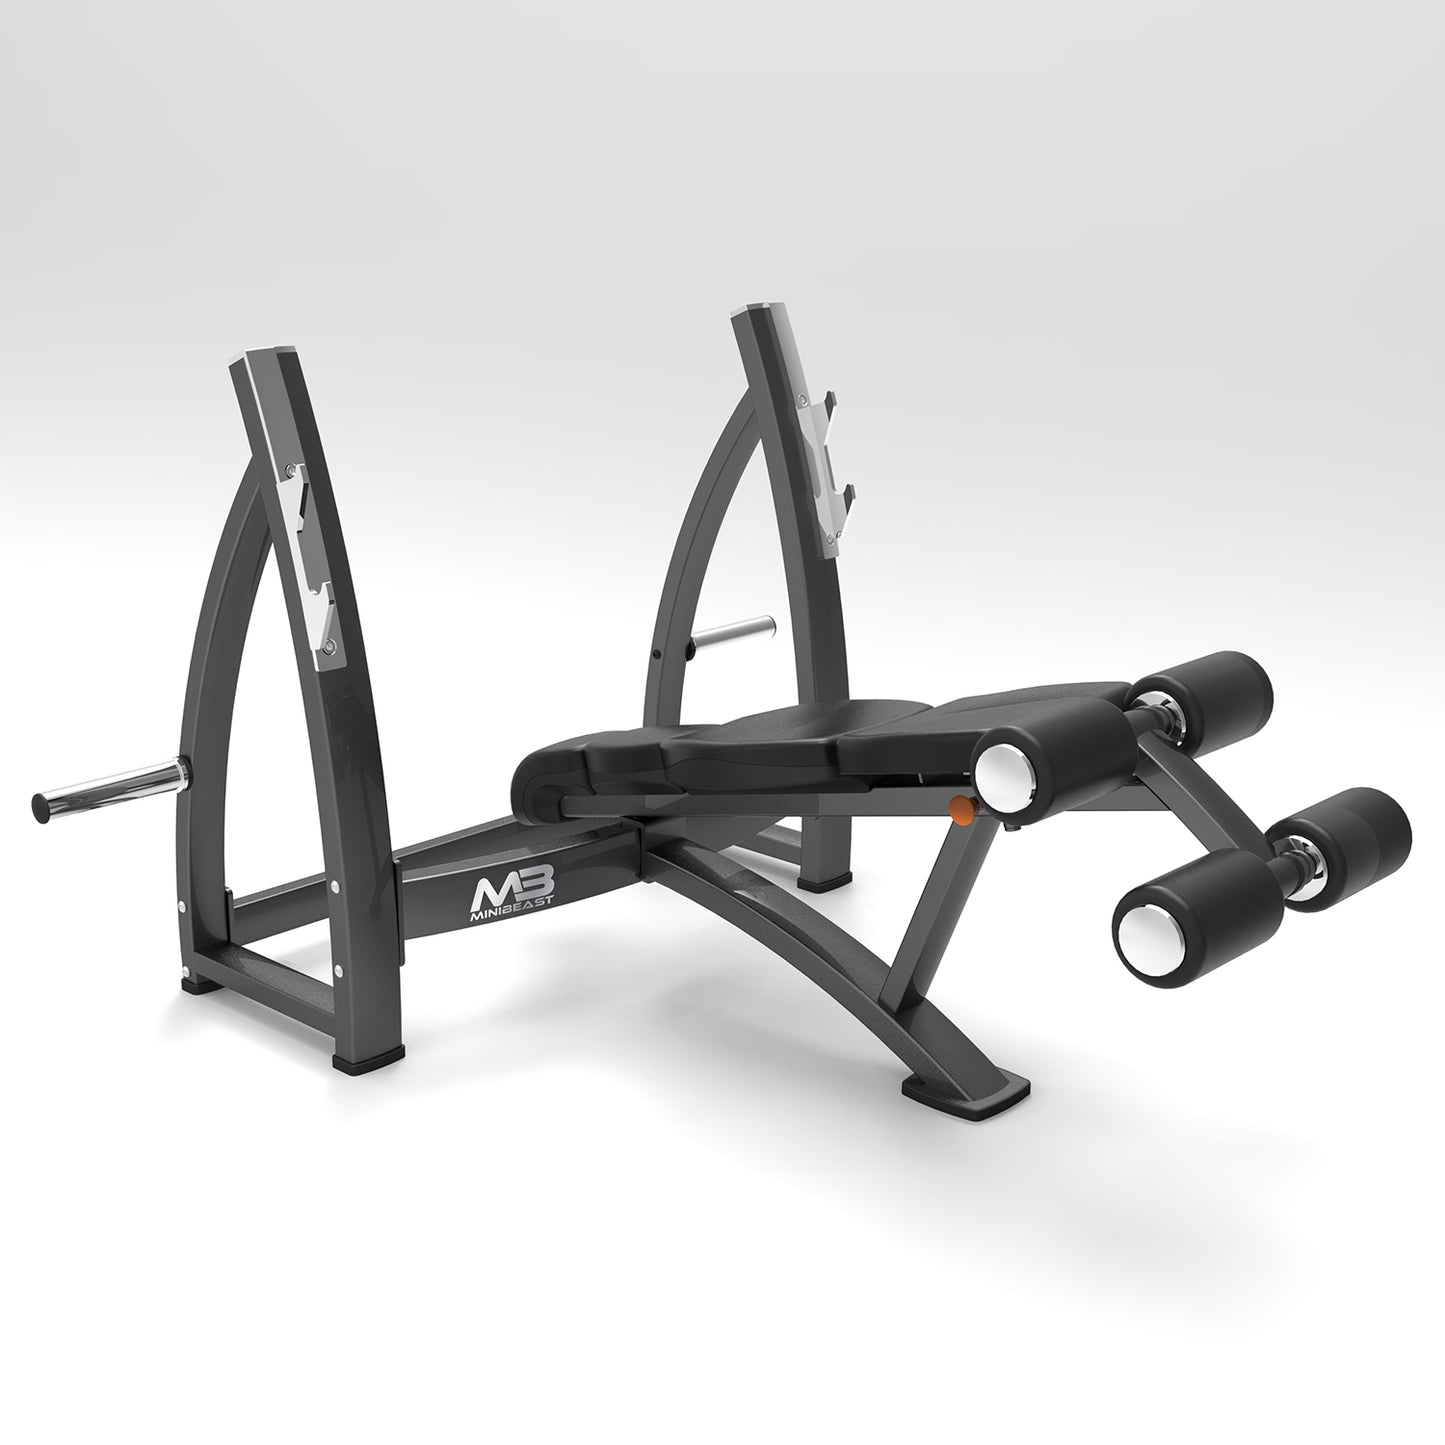 MB73 - Olympic Decline Bench